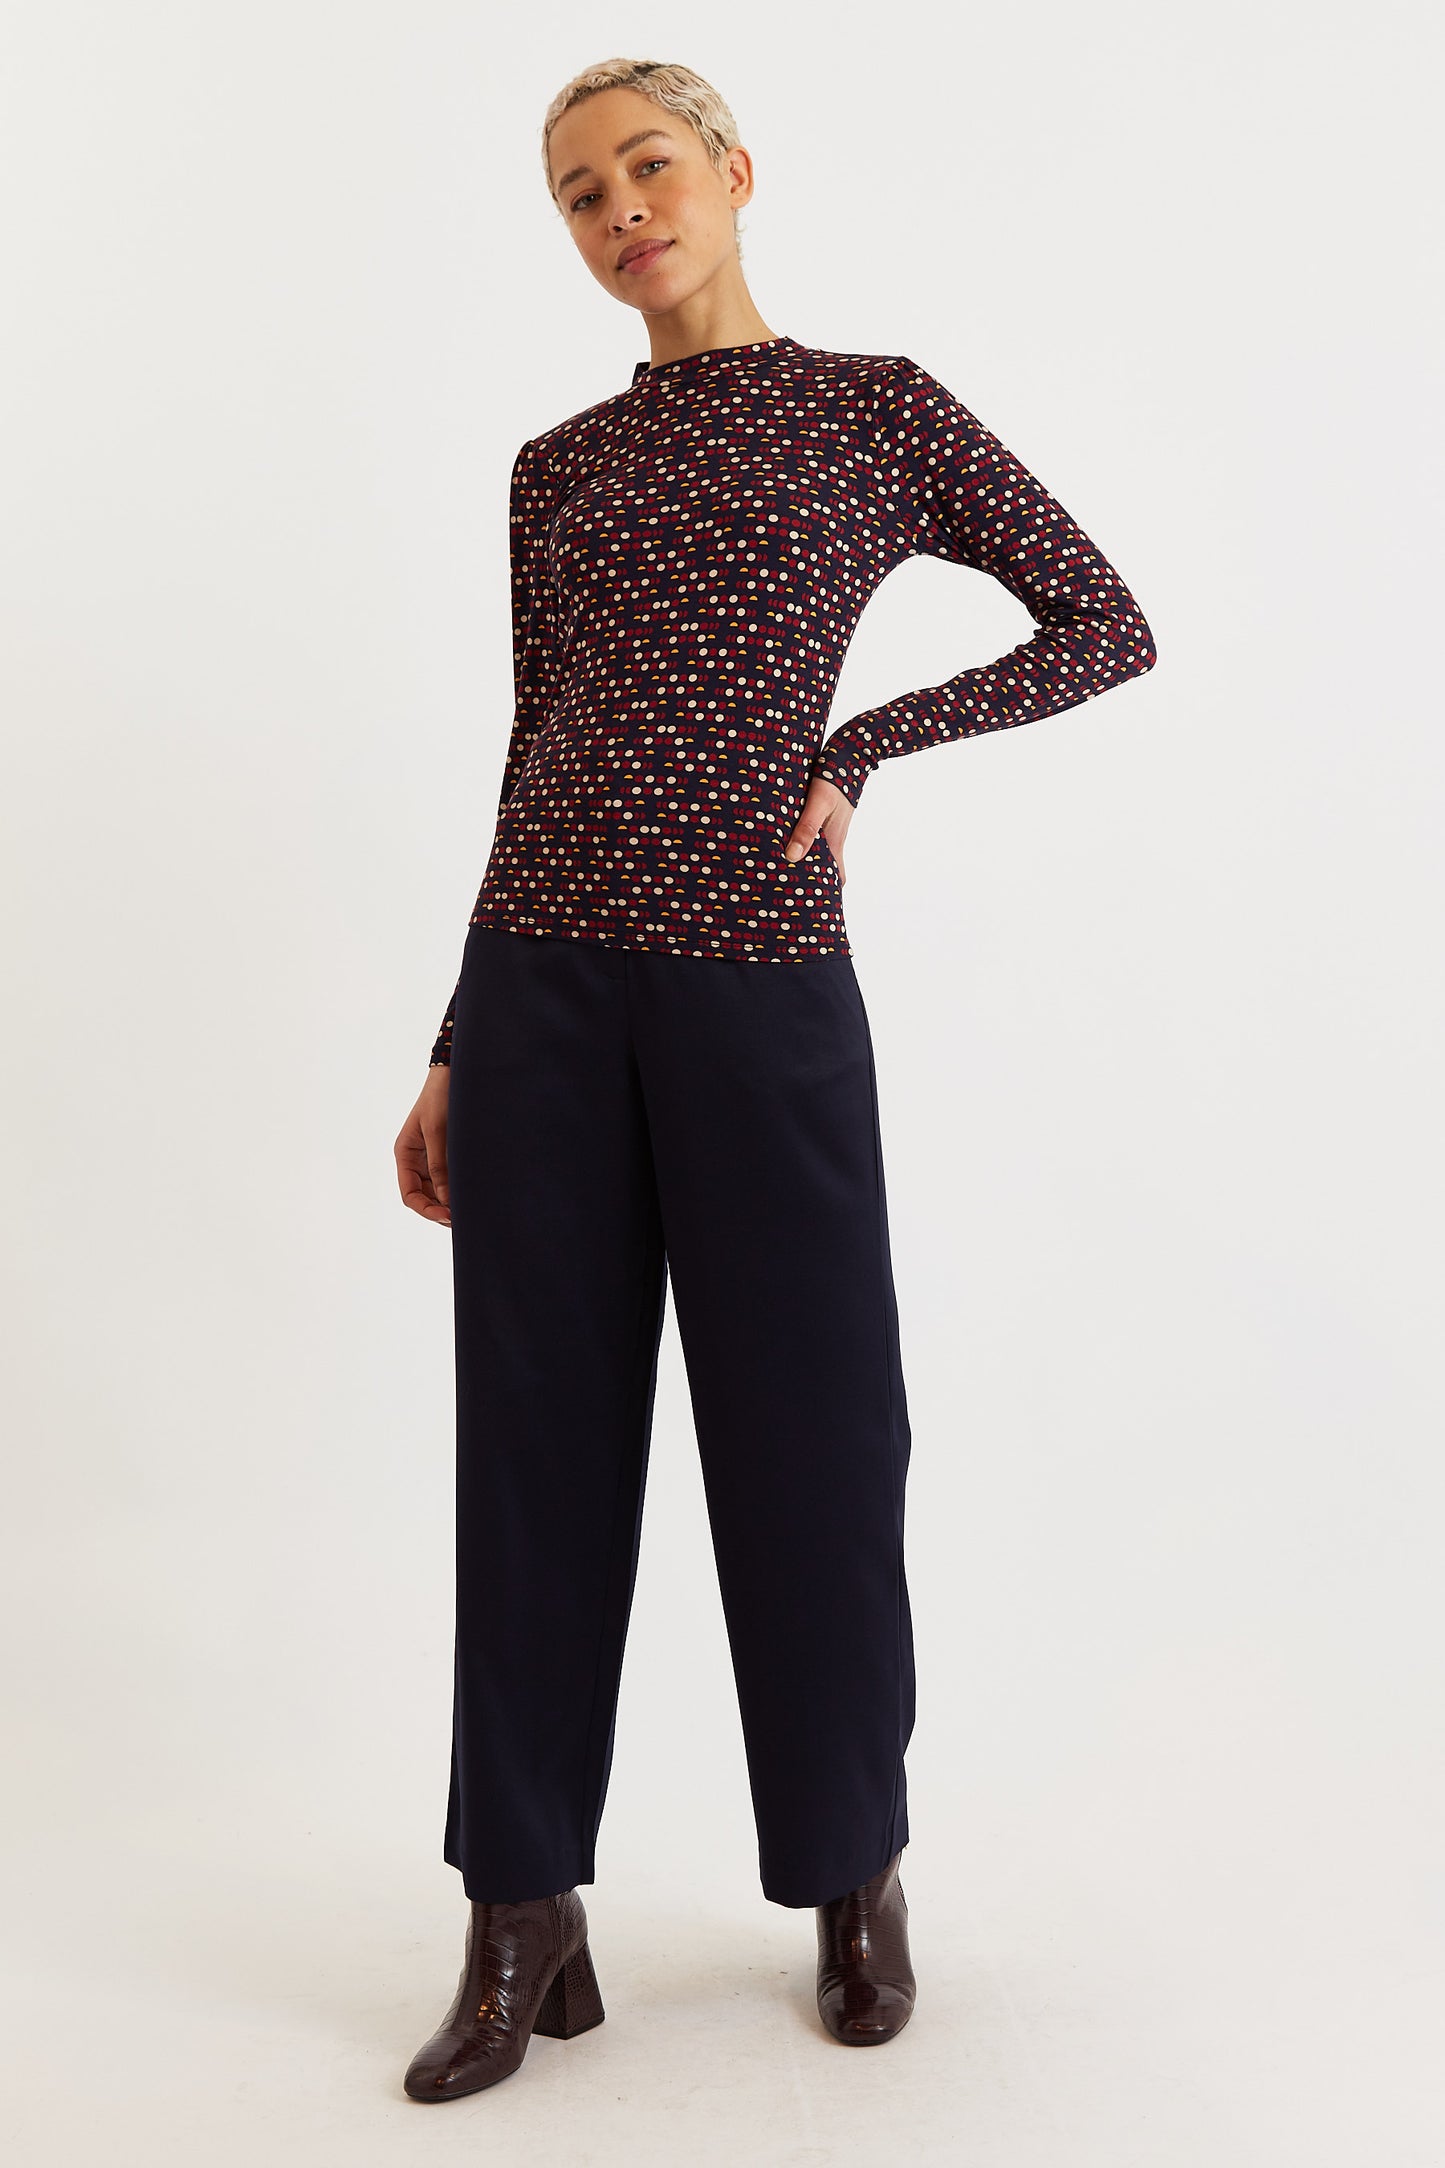 Gilly Retro Dots Print Long Sleeve Top